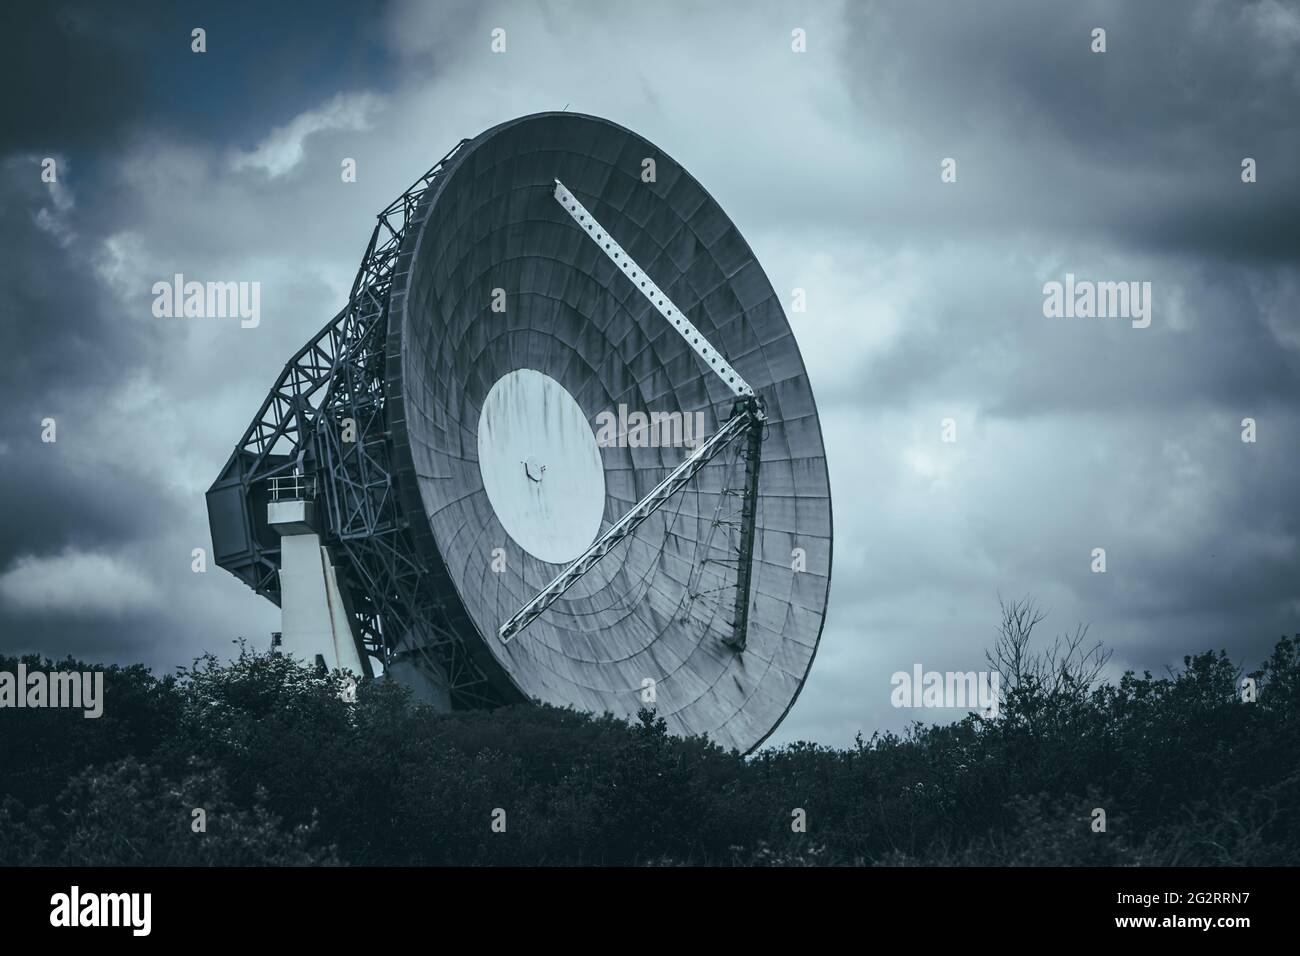 Satellite dishes at Goonhilly, UK Stock Photo